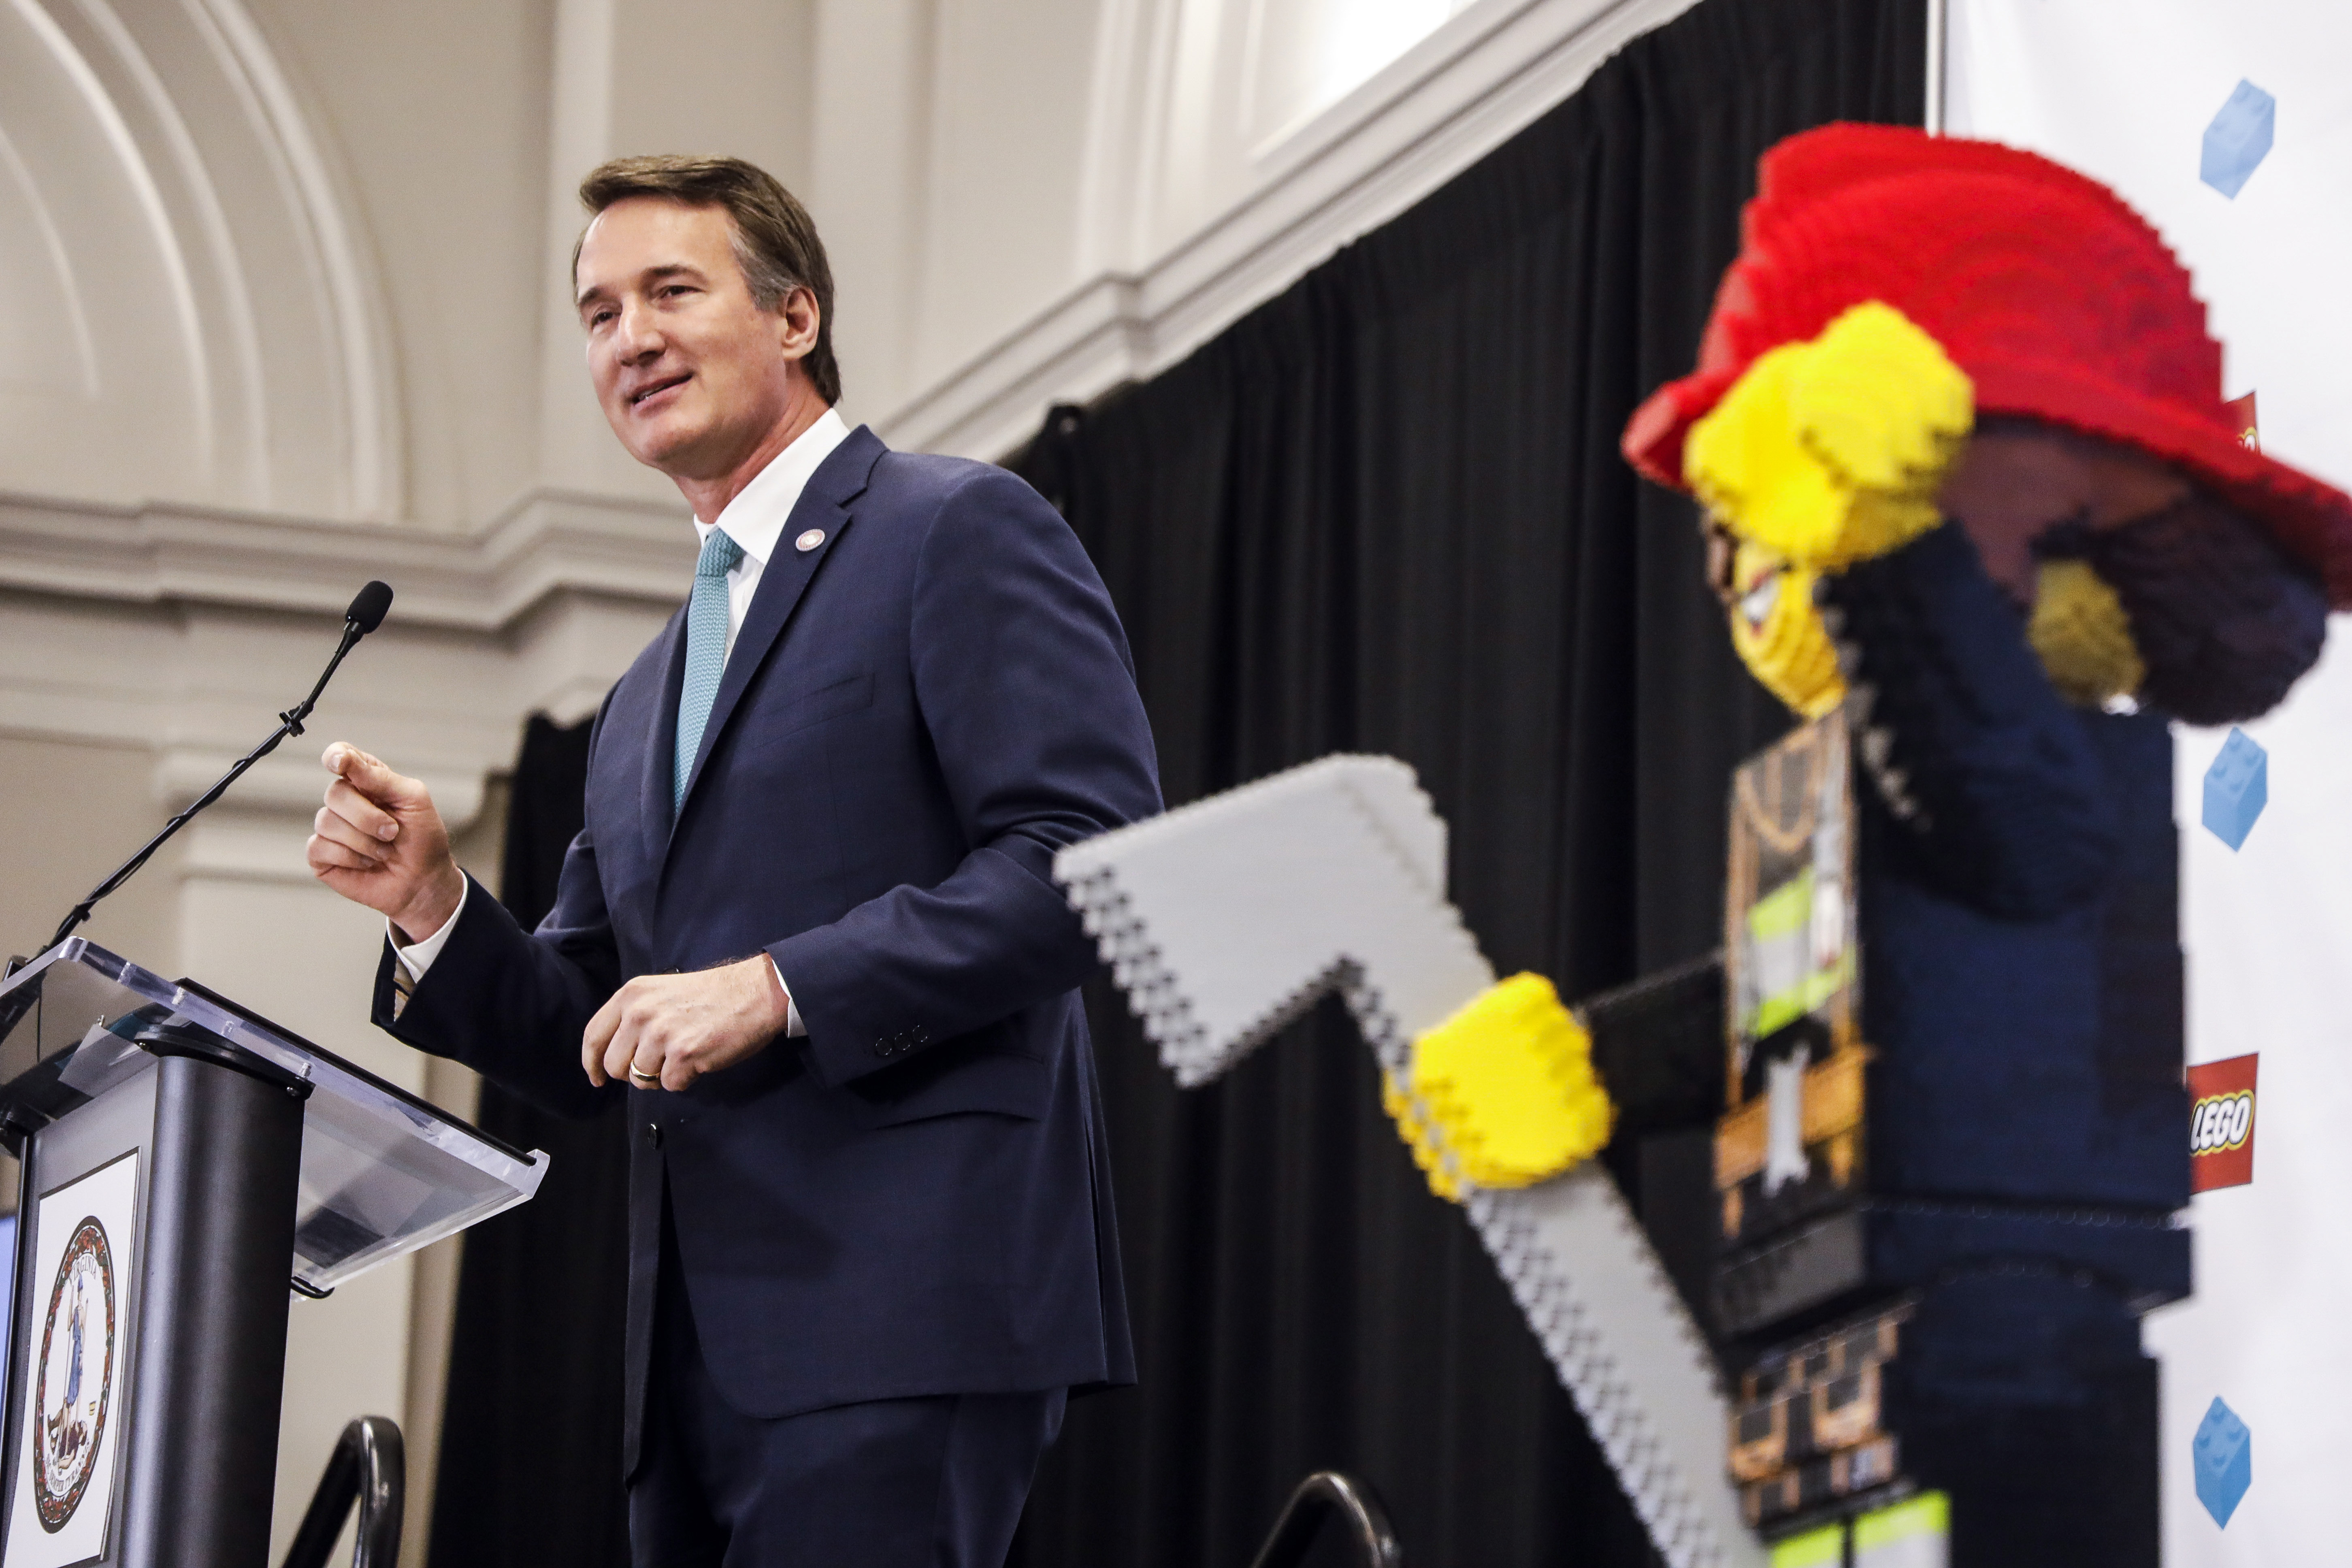 Lego (a real one) to bring nearly 2,000 jobs to Virginia Washington Times